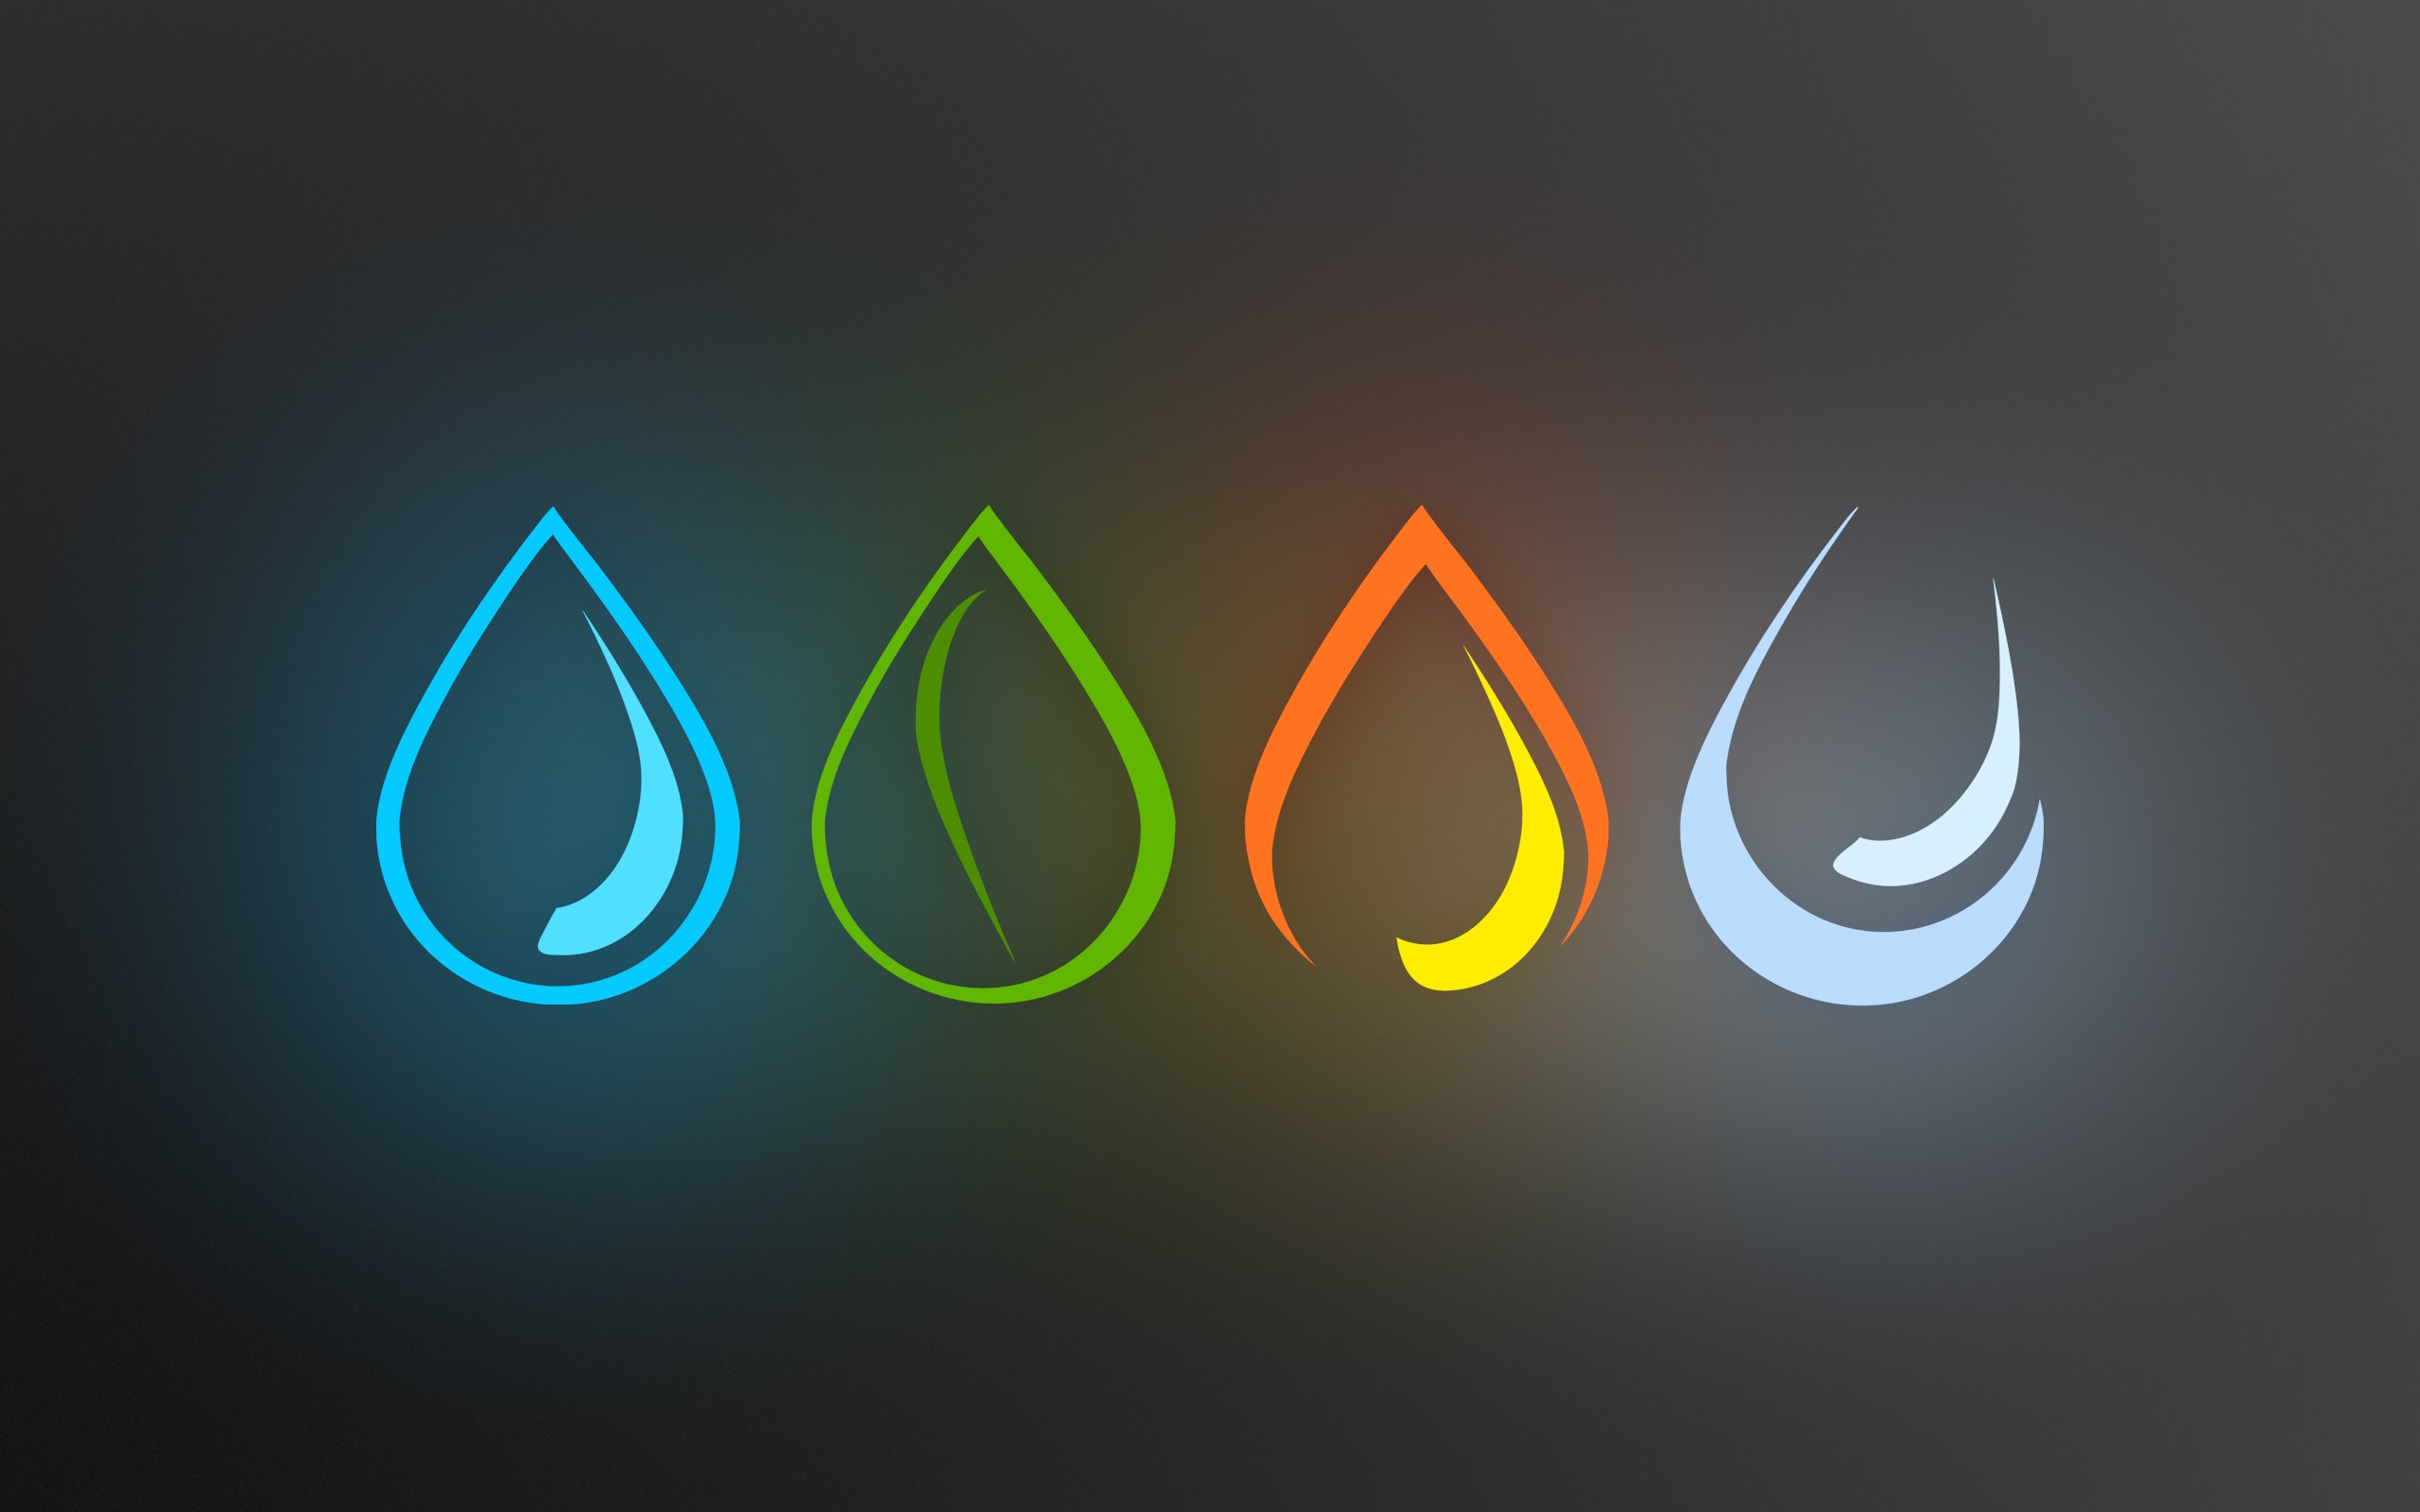 Orange Four Elements Abstract Simple Background Blue Elements Digital Art Avatar: The Last Airbender Green Simple Colorful